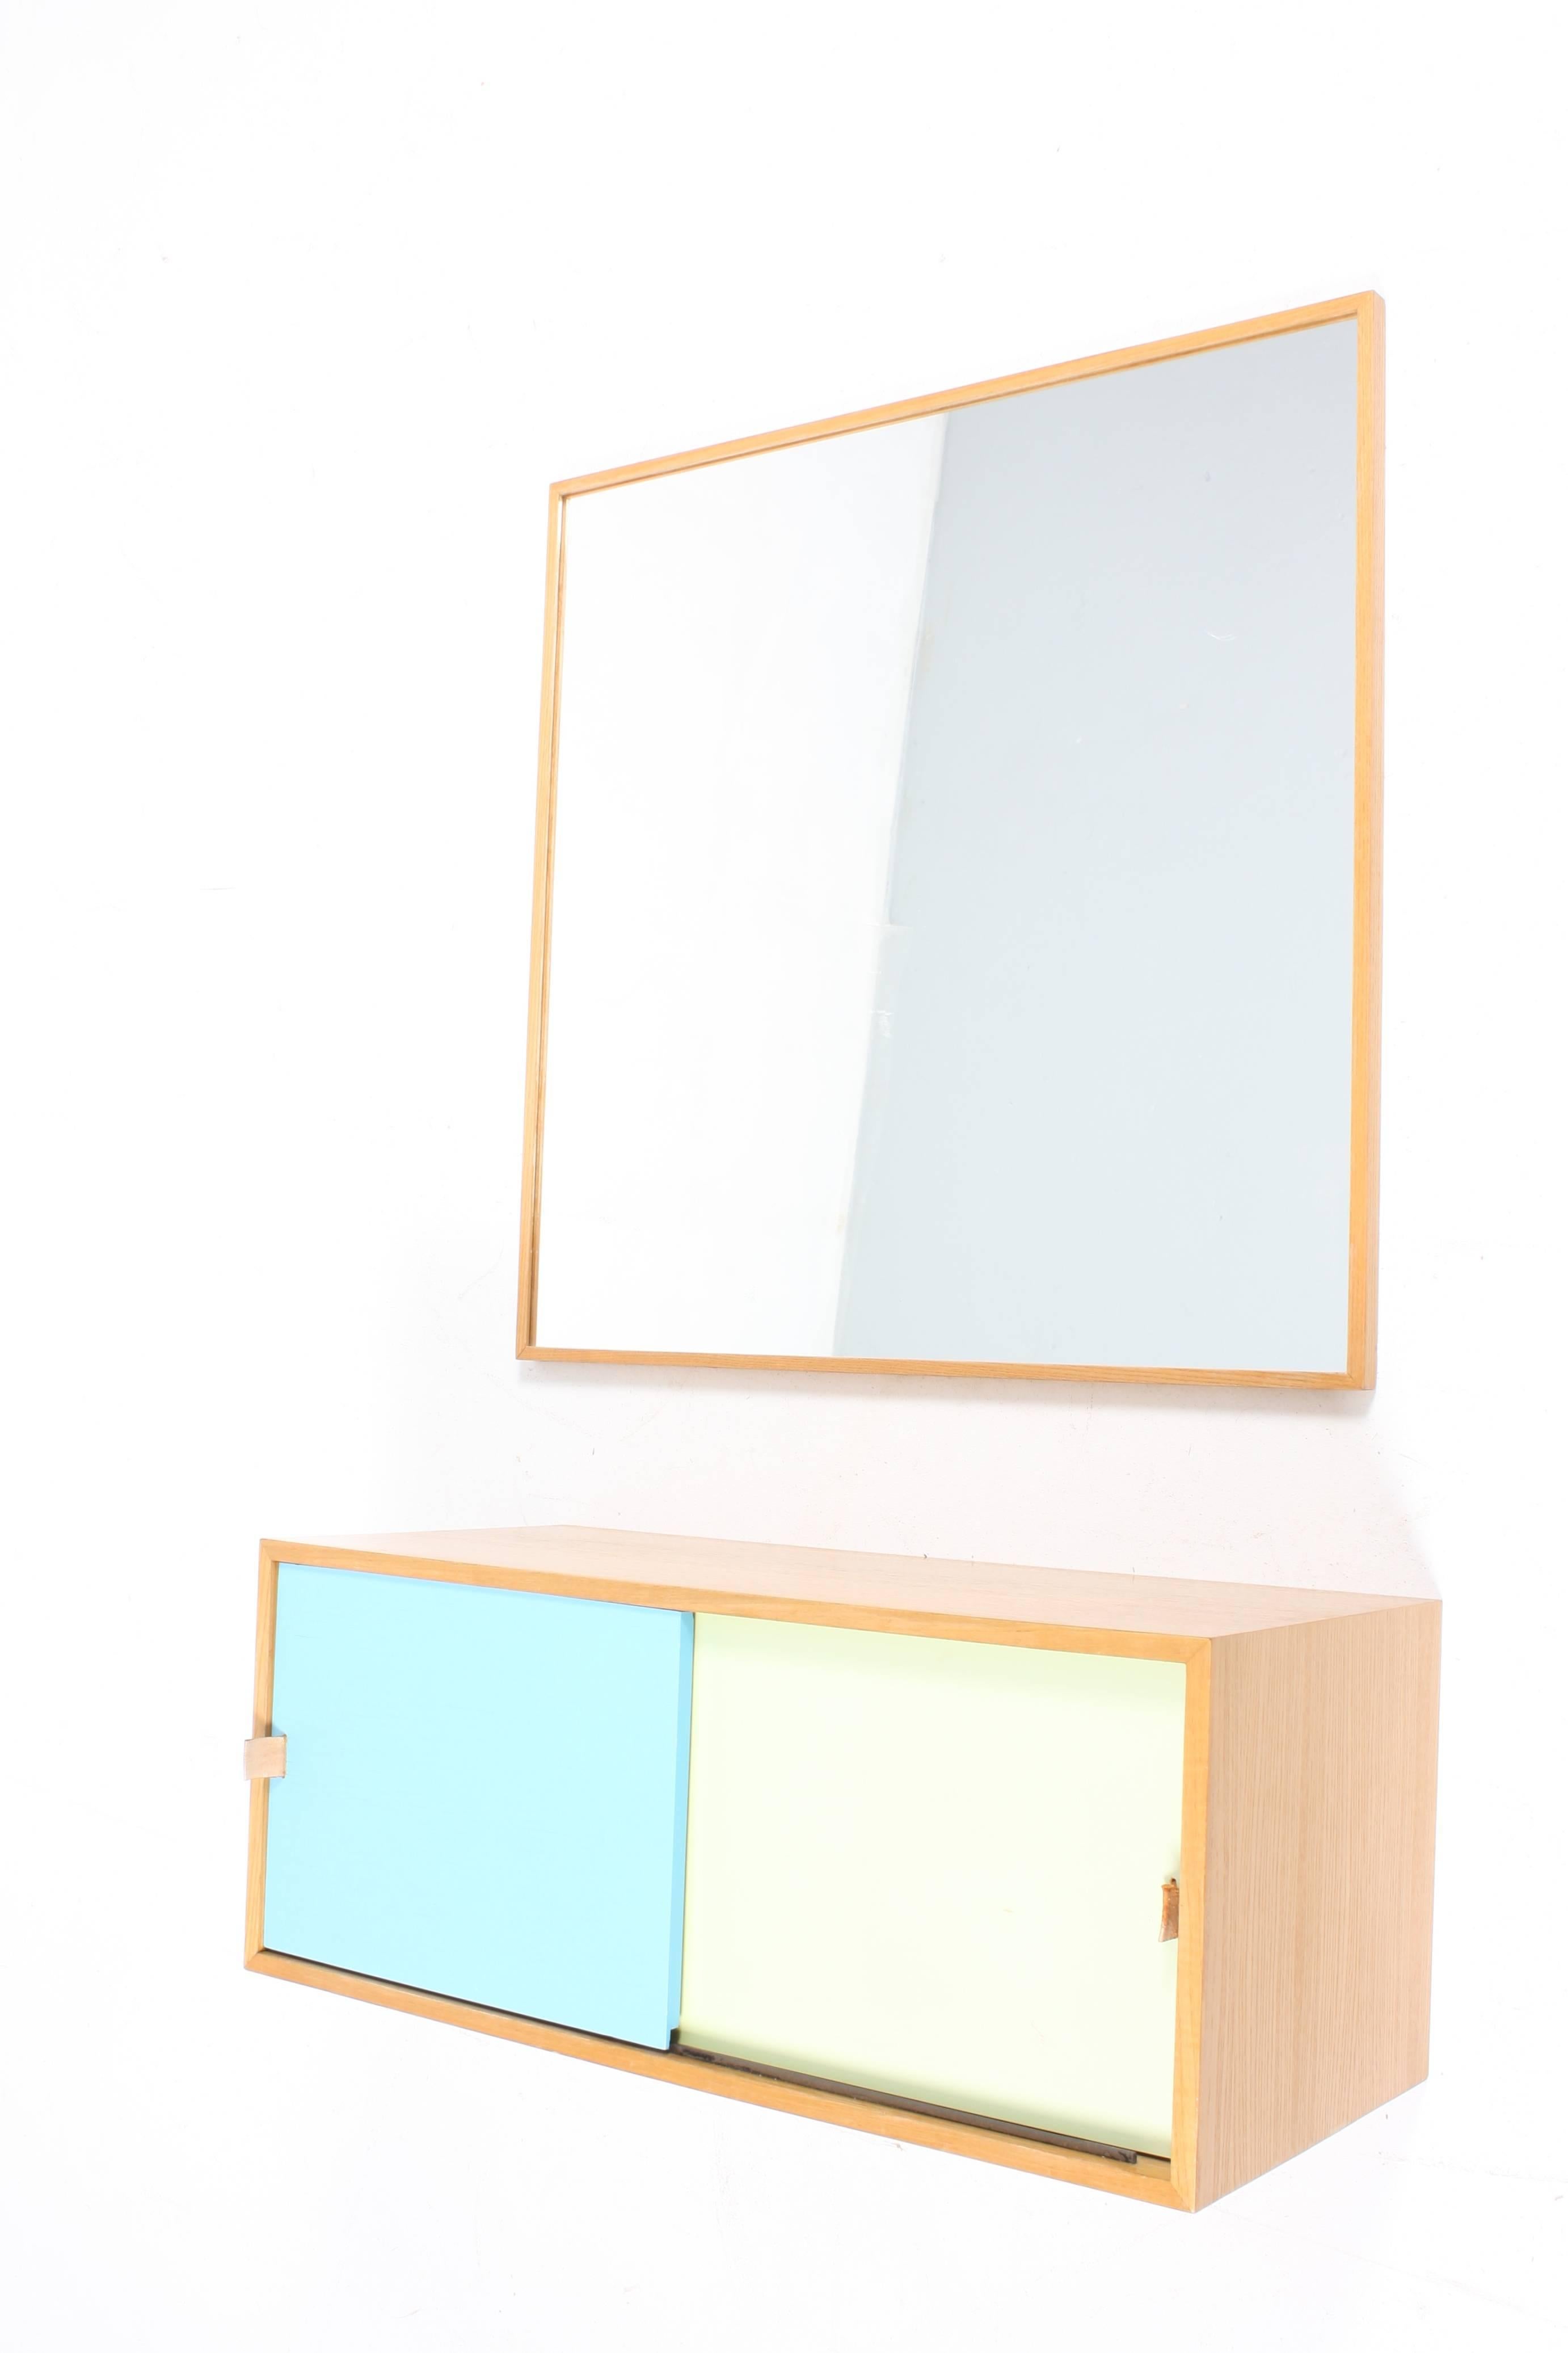 Matching mirror and console in oak with colored panels and handles in patinated leather. Designed and made by Harbo Sølvsten M.A.A in the 1950s. Made in Denmark. Great original condition.